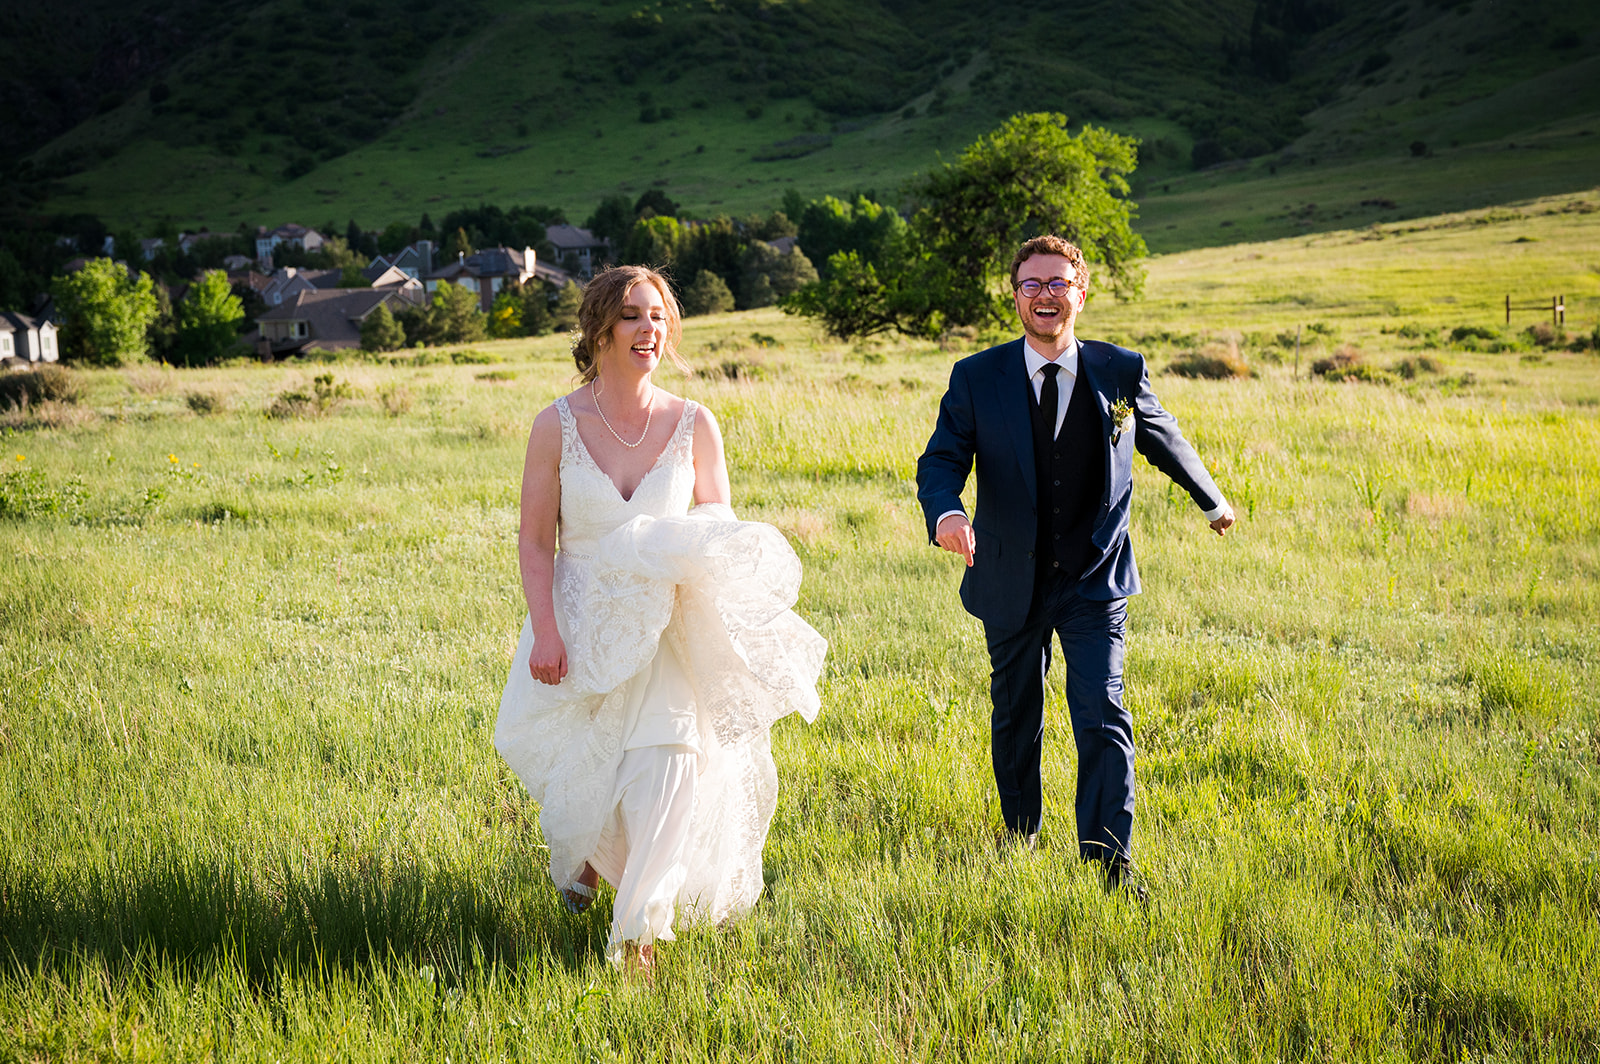 Bride and groom run through field laughing at golden hour.